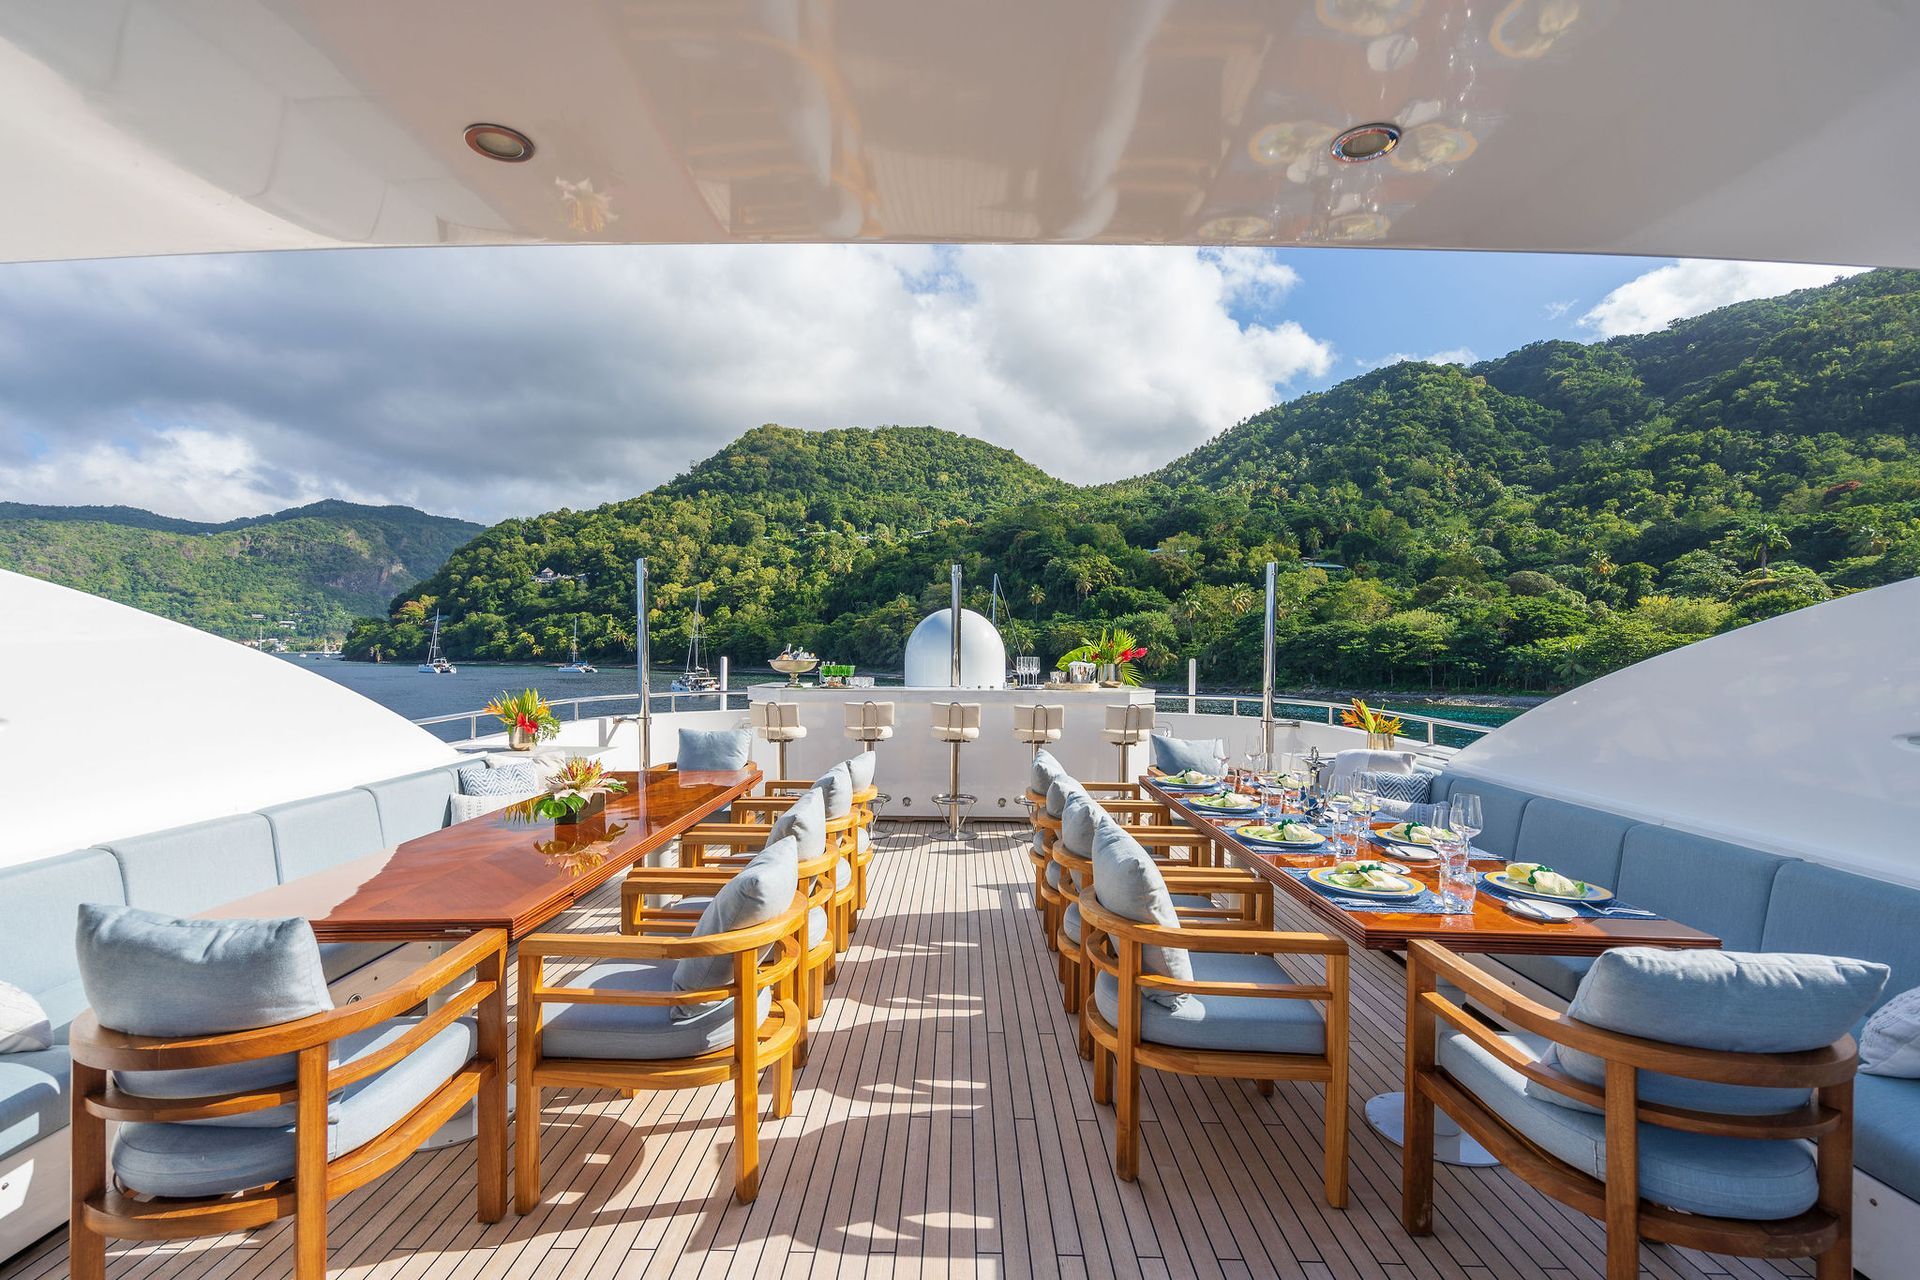 there are many chairs and tables on the deck of a yacht